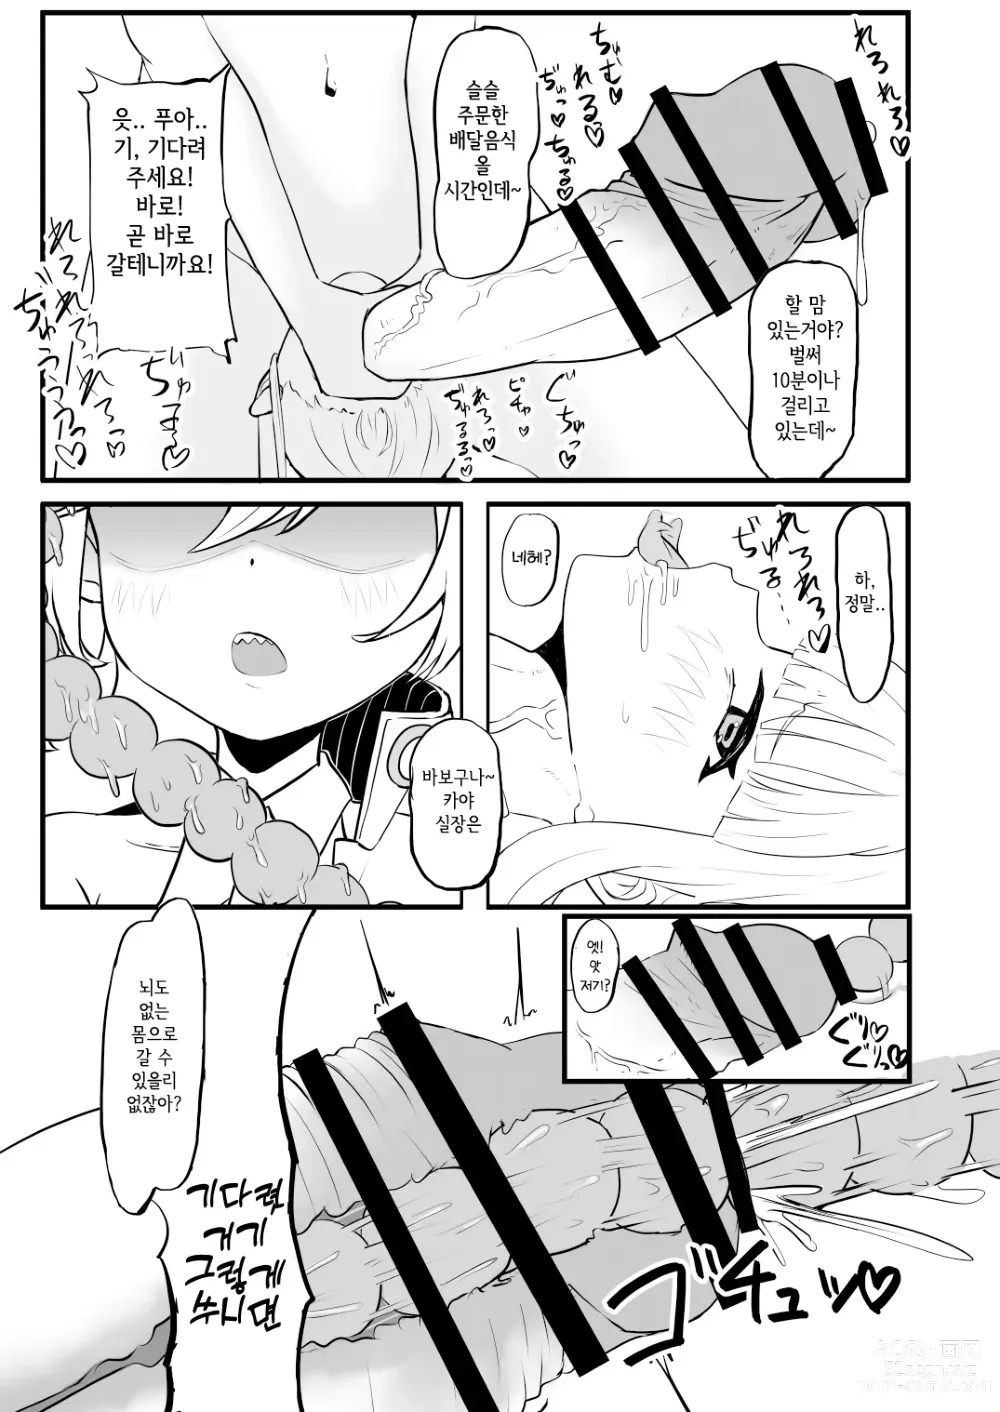 Page 29 of doujinshi Dick Neck Mix! Vol. 2 블루아카 좆목 합동지